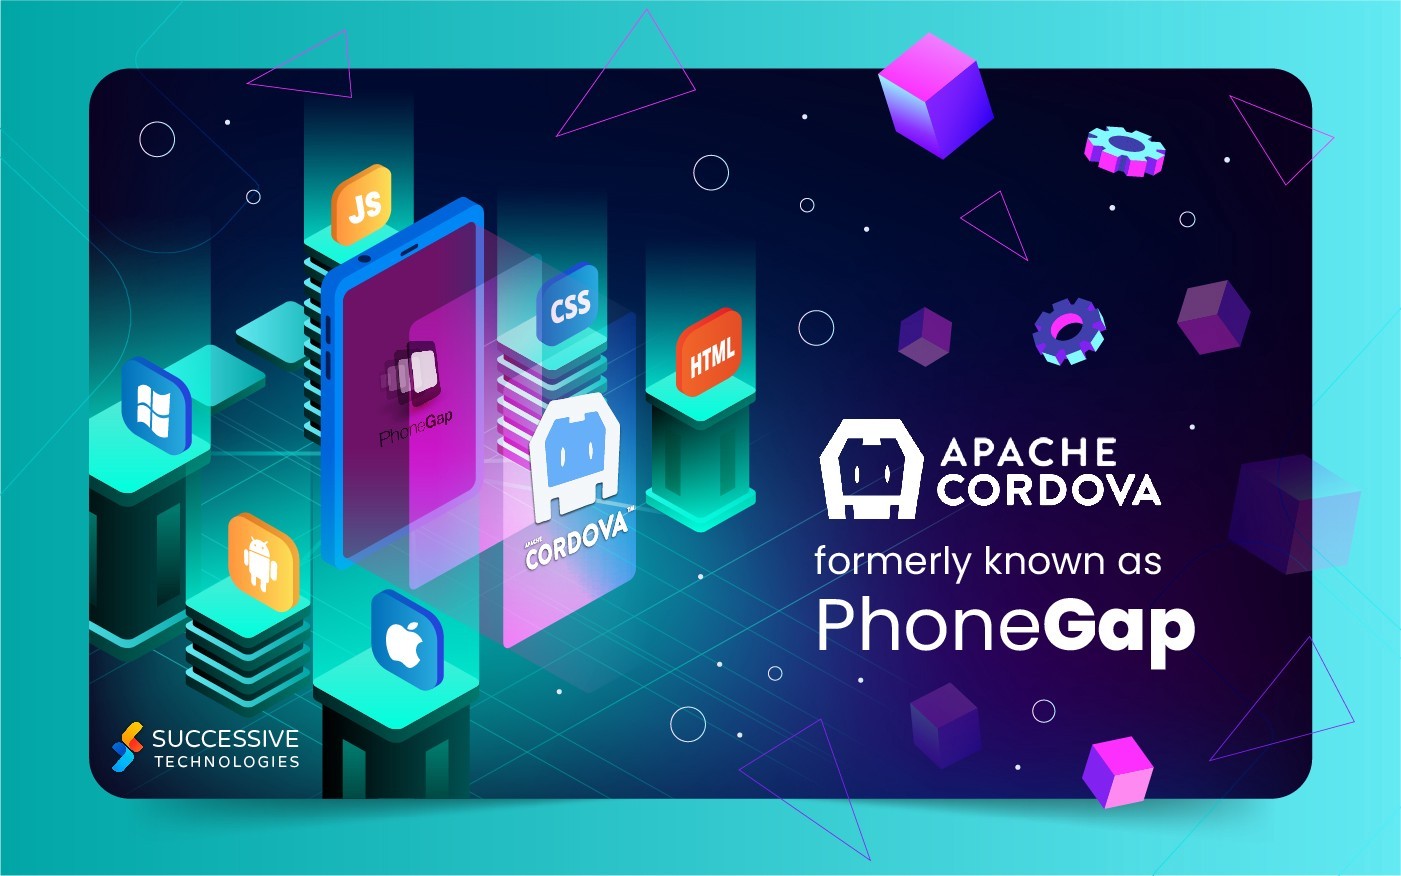 Growing Revolution of Apache Cordova from PhoneGap